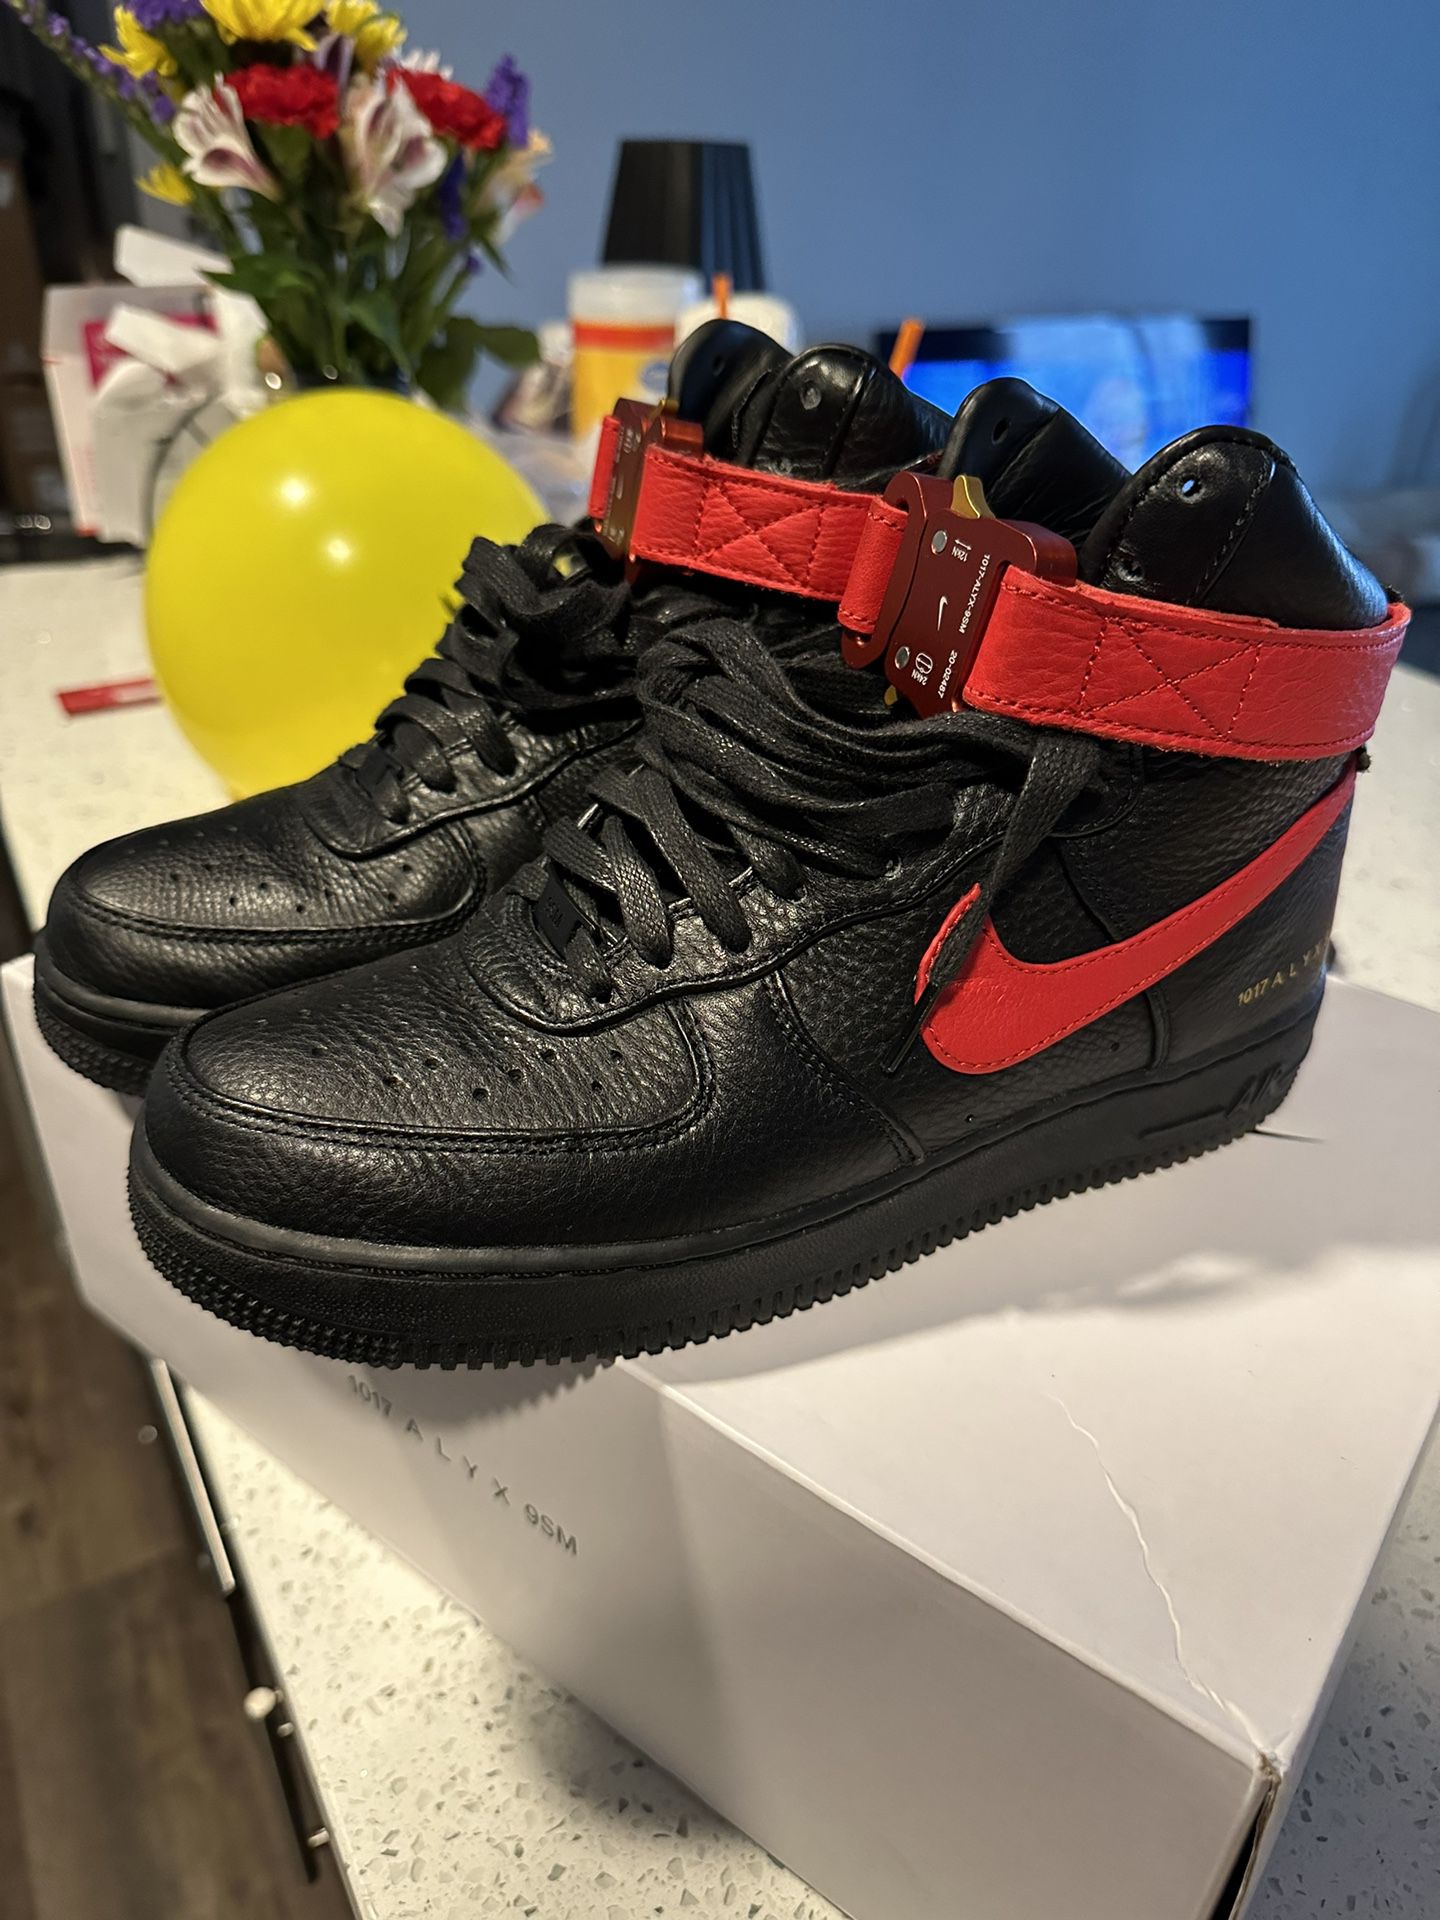 Nike Air Force 1 High X 1017 ALYX 9SM Size 8.5 for Sale in Union